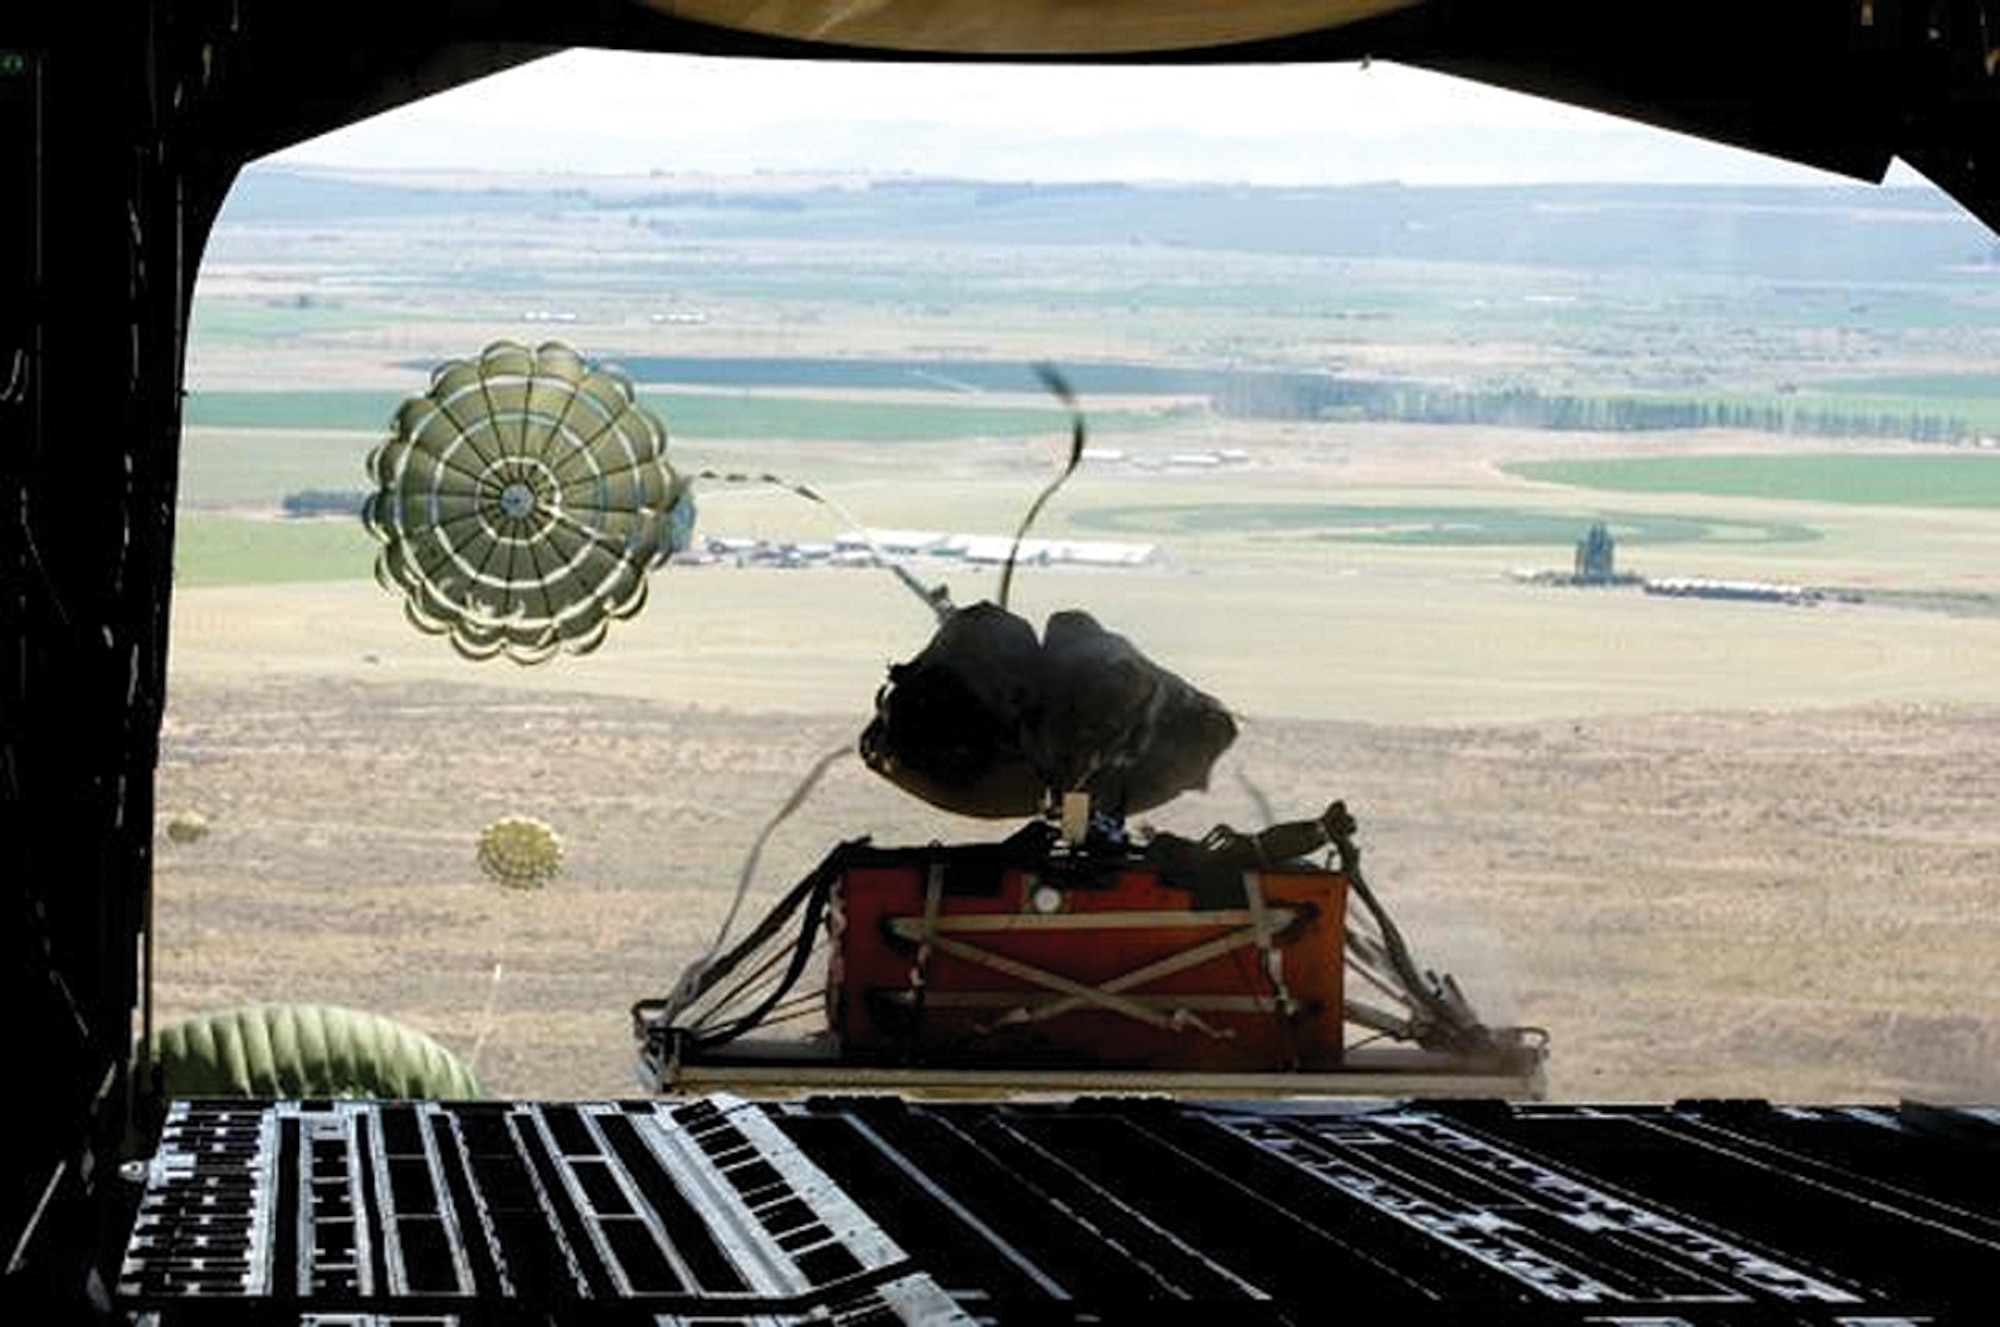 A heavy pallet is airdropped over the Larsen drop zone in Moses Lake, Wash., where reservists fromthe 446th Airlift Wing and active-duty Airmen from the 62nd Airlift Wing, gathered July 10 to fine tune their skills for Air Mobility Command's Rodeo 2007. Both wings are assigned to McChord Air Force Base, Wash. More than 55 U.S. and international teams are slated to participate in AMC's Rodeo 2007 to be held July 22 through 28 at McChord. The competition focuses on readiness, and features airdrop, air refueling, and other events showcasing security forces, aerial port, maintenance and aeromedical evacuation personnel. (U.S. Air Force photo/Abner Guzman)